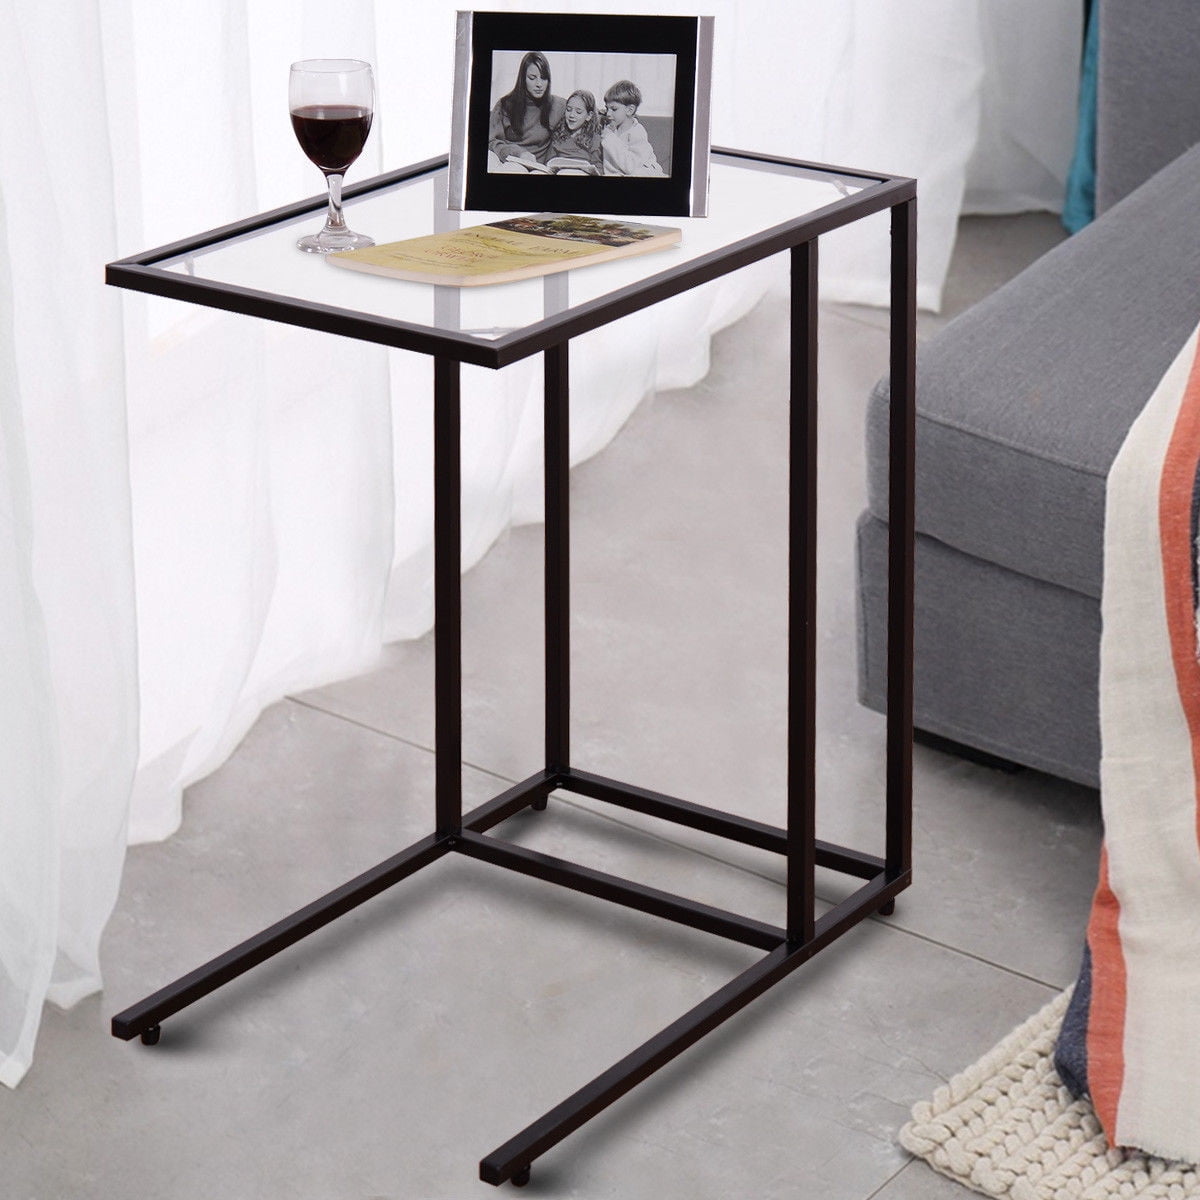 w/ stand Coffee Table tray